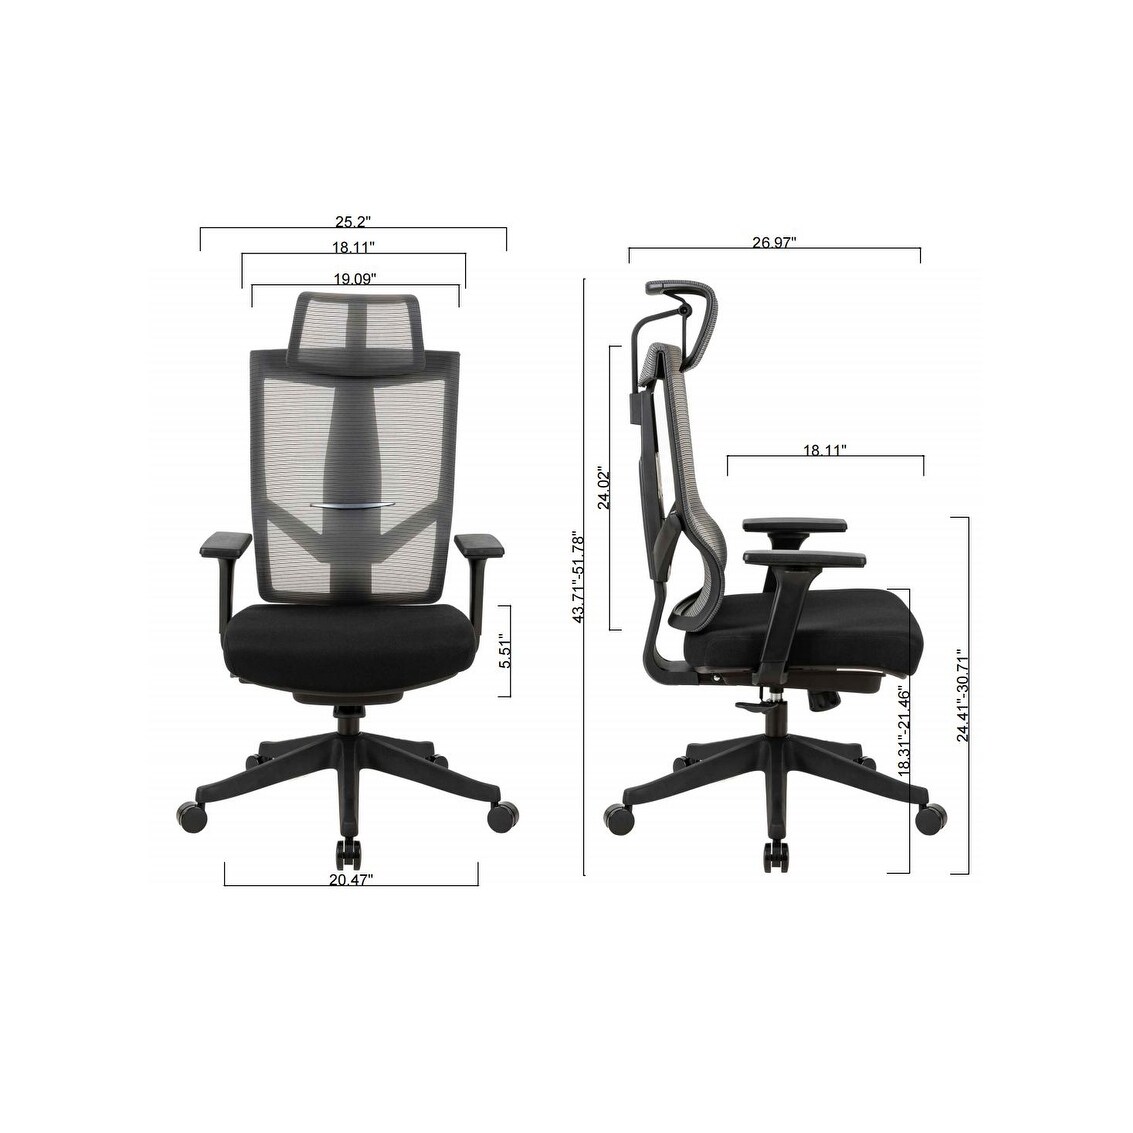 Excustive office chair with headrest and 2D armrest, chase back function with 7 gears adjustment in Black